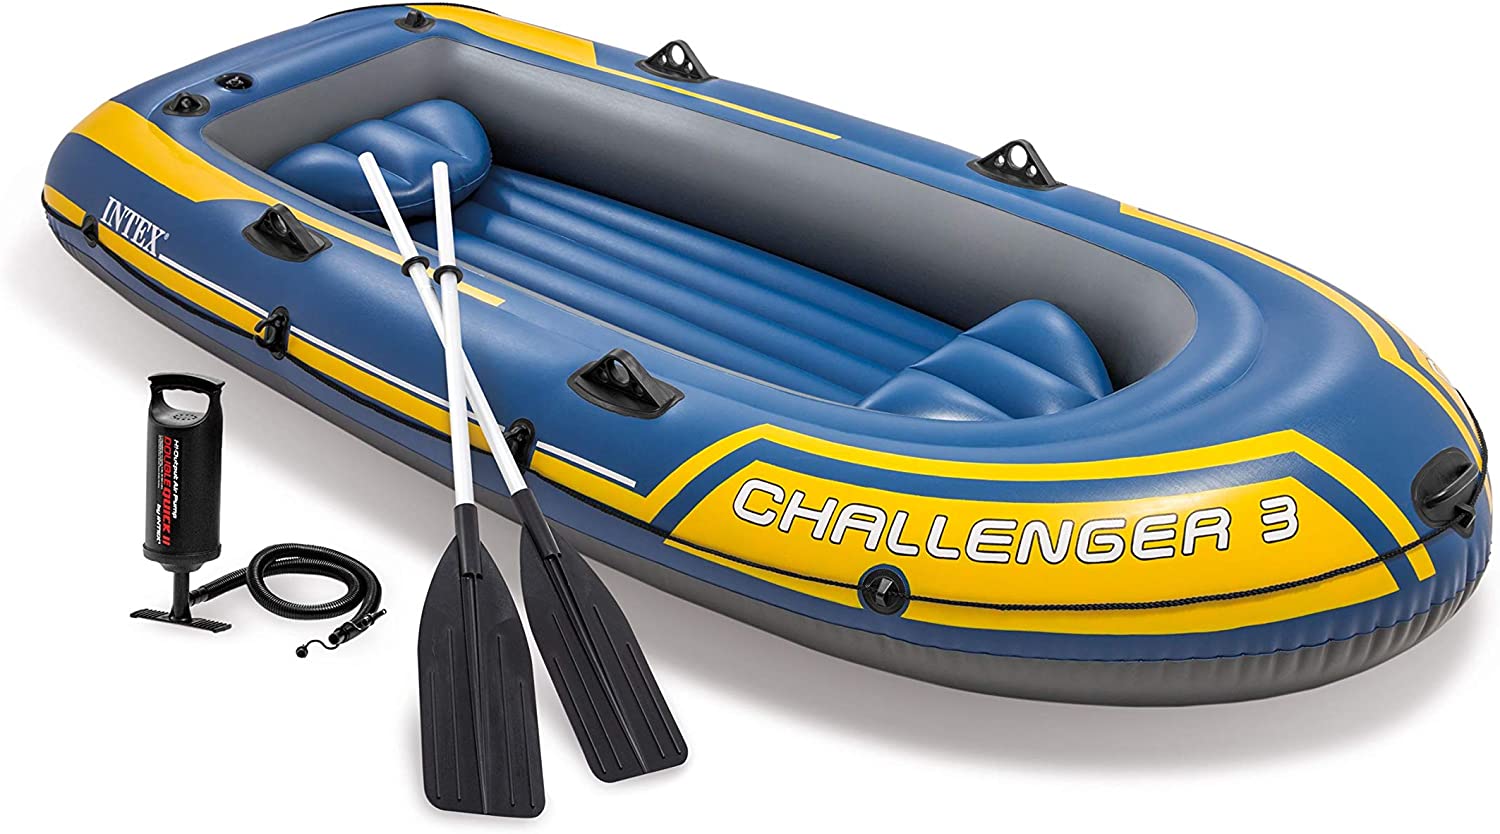 Intex Challenger Inflatable Boat Series (3-Person) $60 + free s/h